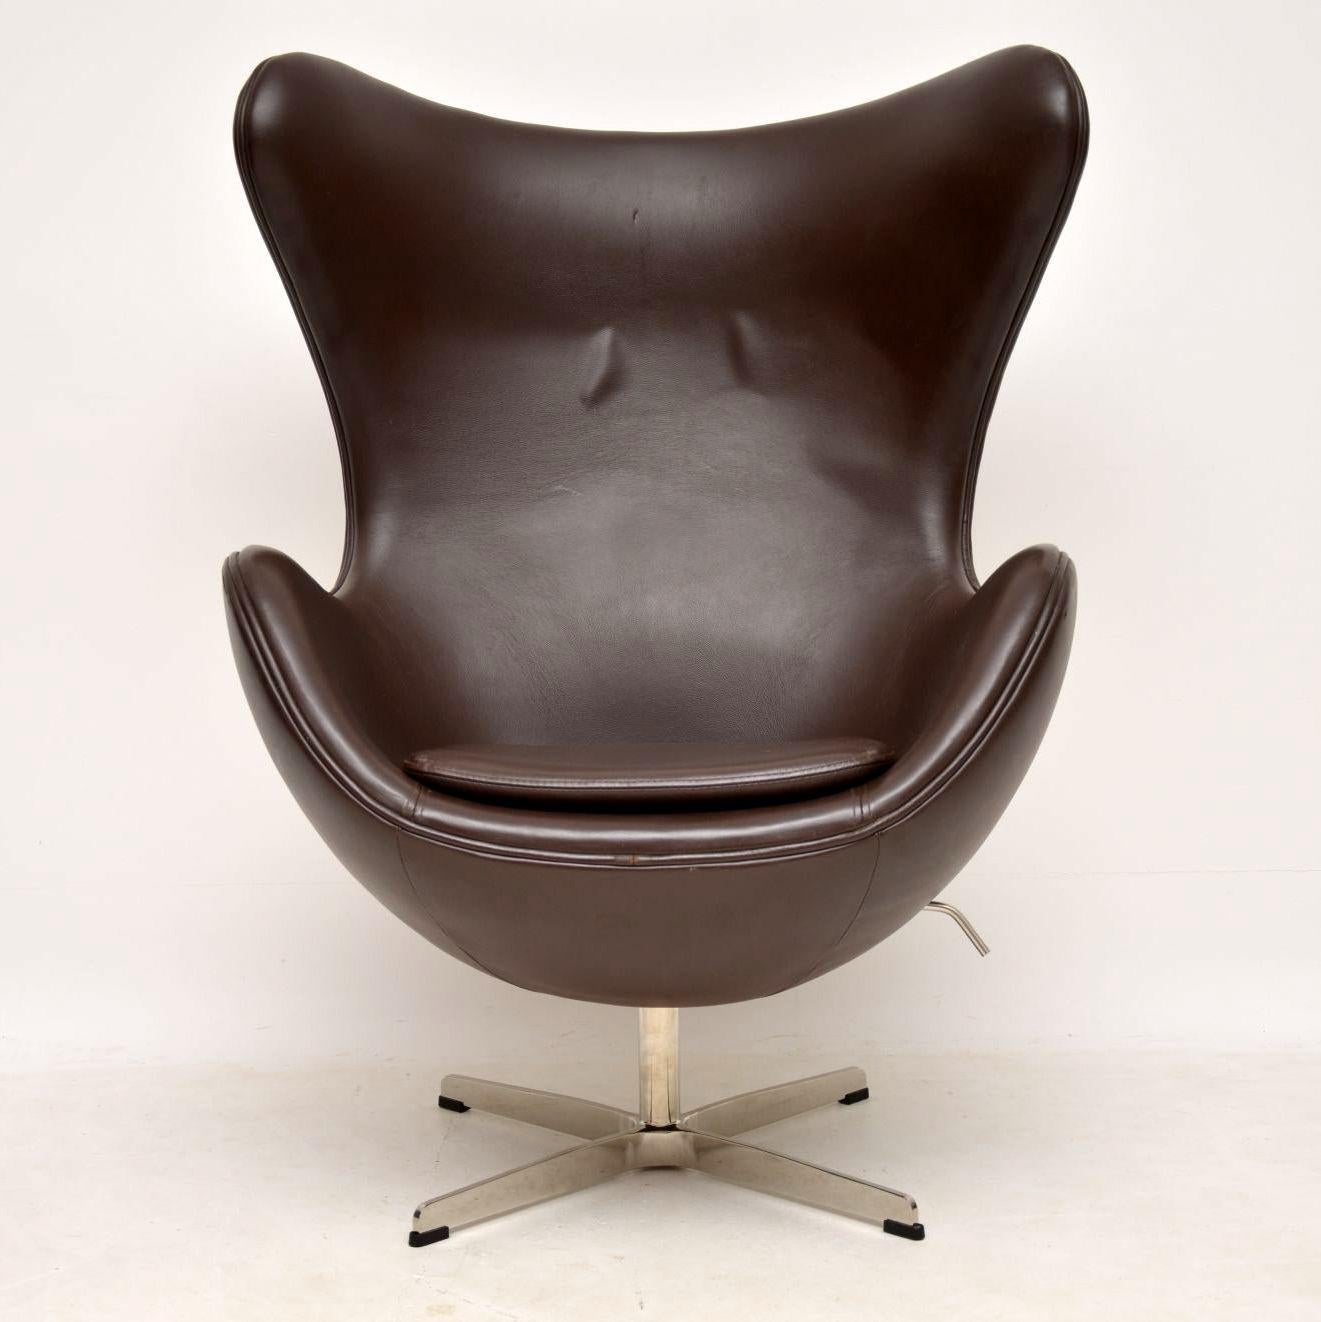 A stunning retro genuine leather egg chair, this was originally designed by Arne Jacobsen in the 1950s. This is a more modern version, dating from the late 20th century, but the quality and condition is excellent. There is just some extremely minor